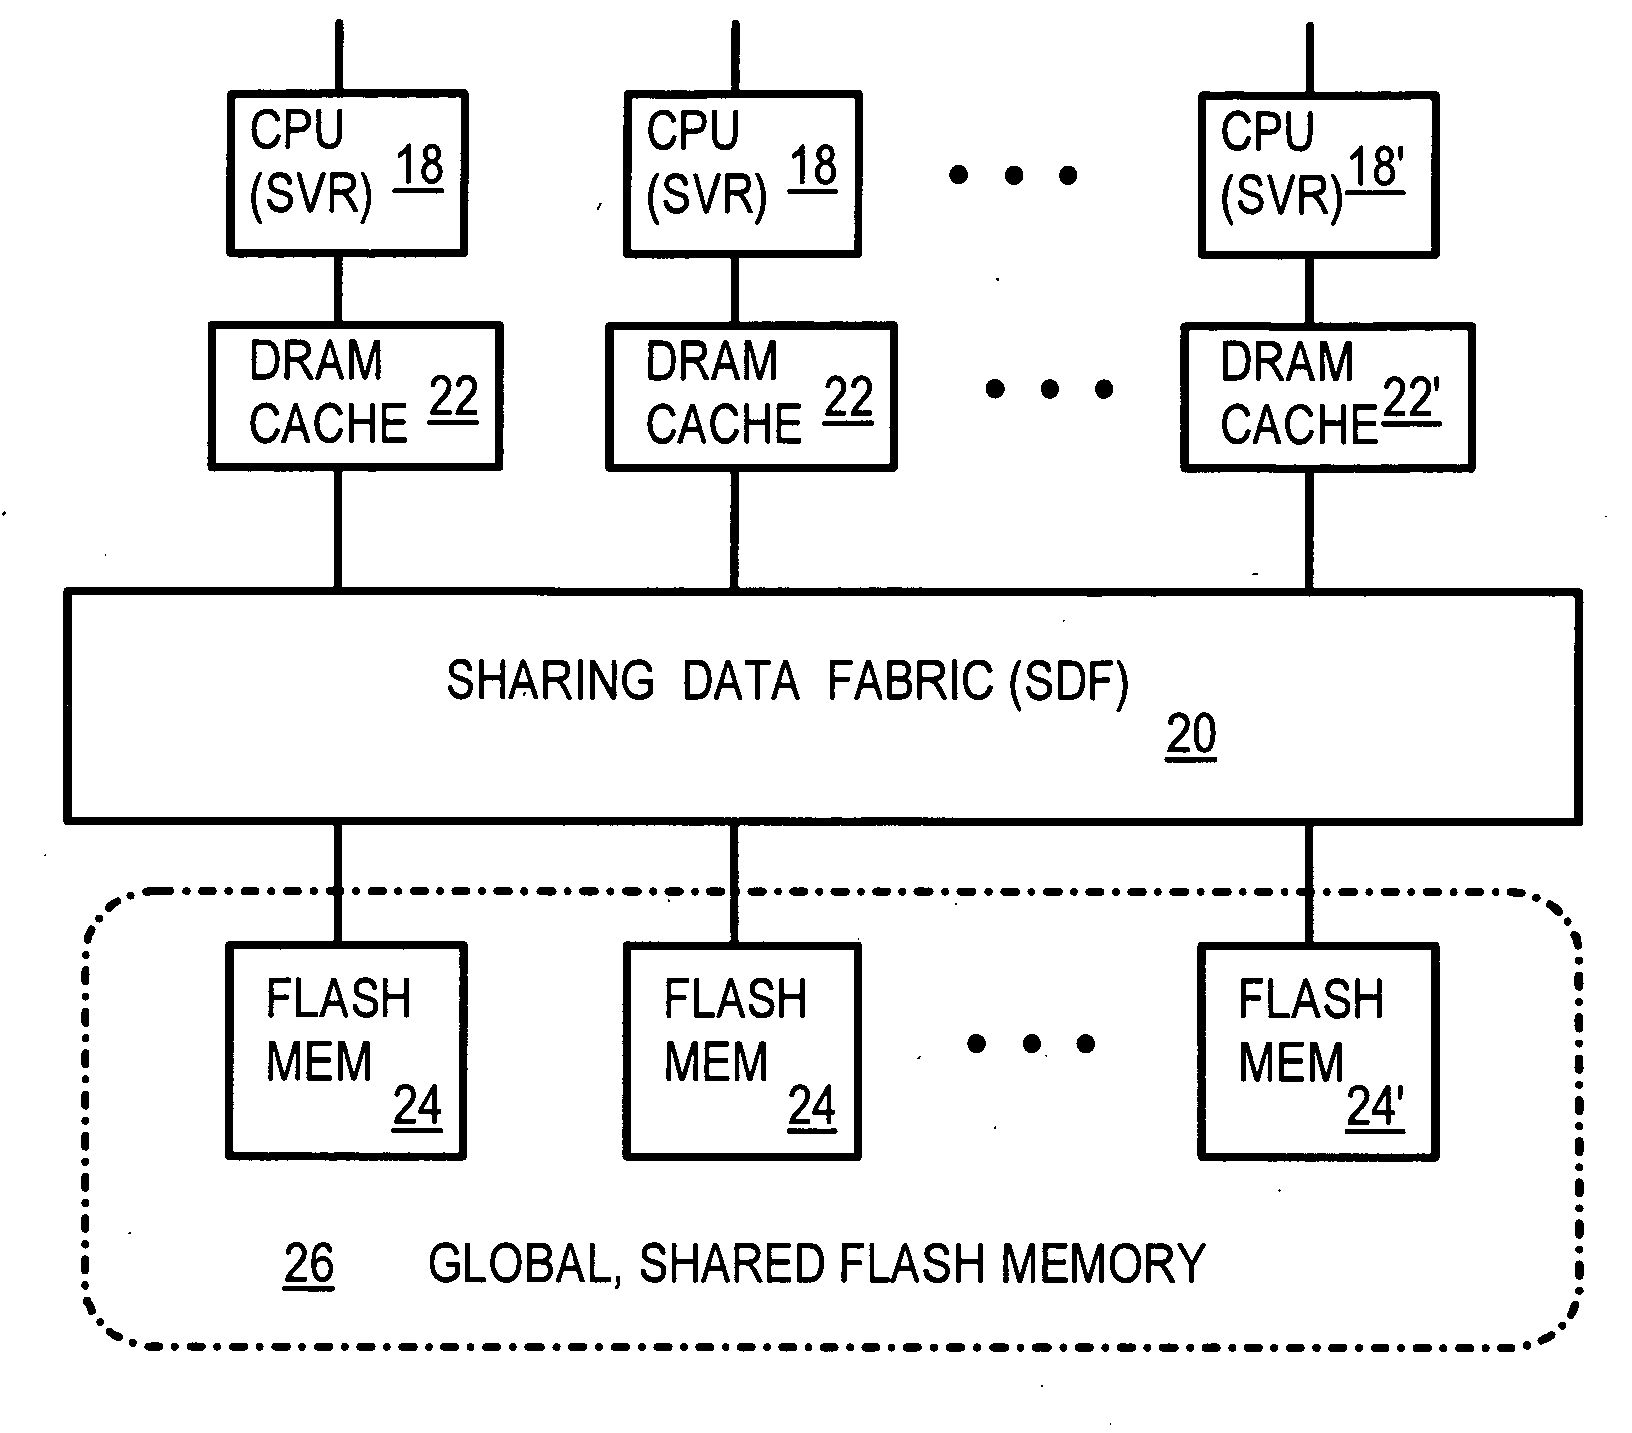 Sharing Data Fabric for Coherent-Distributed Caching of Multi-Node Shared-Distributed Flash Memory